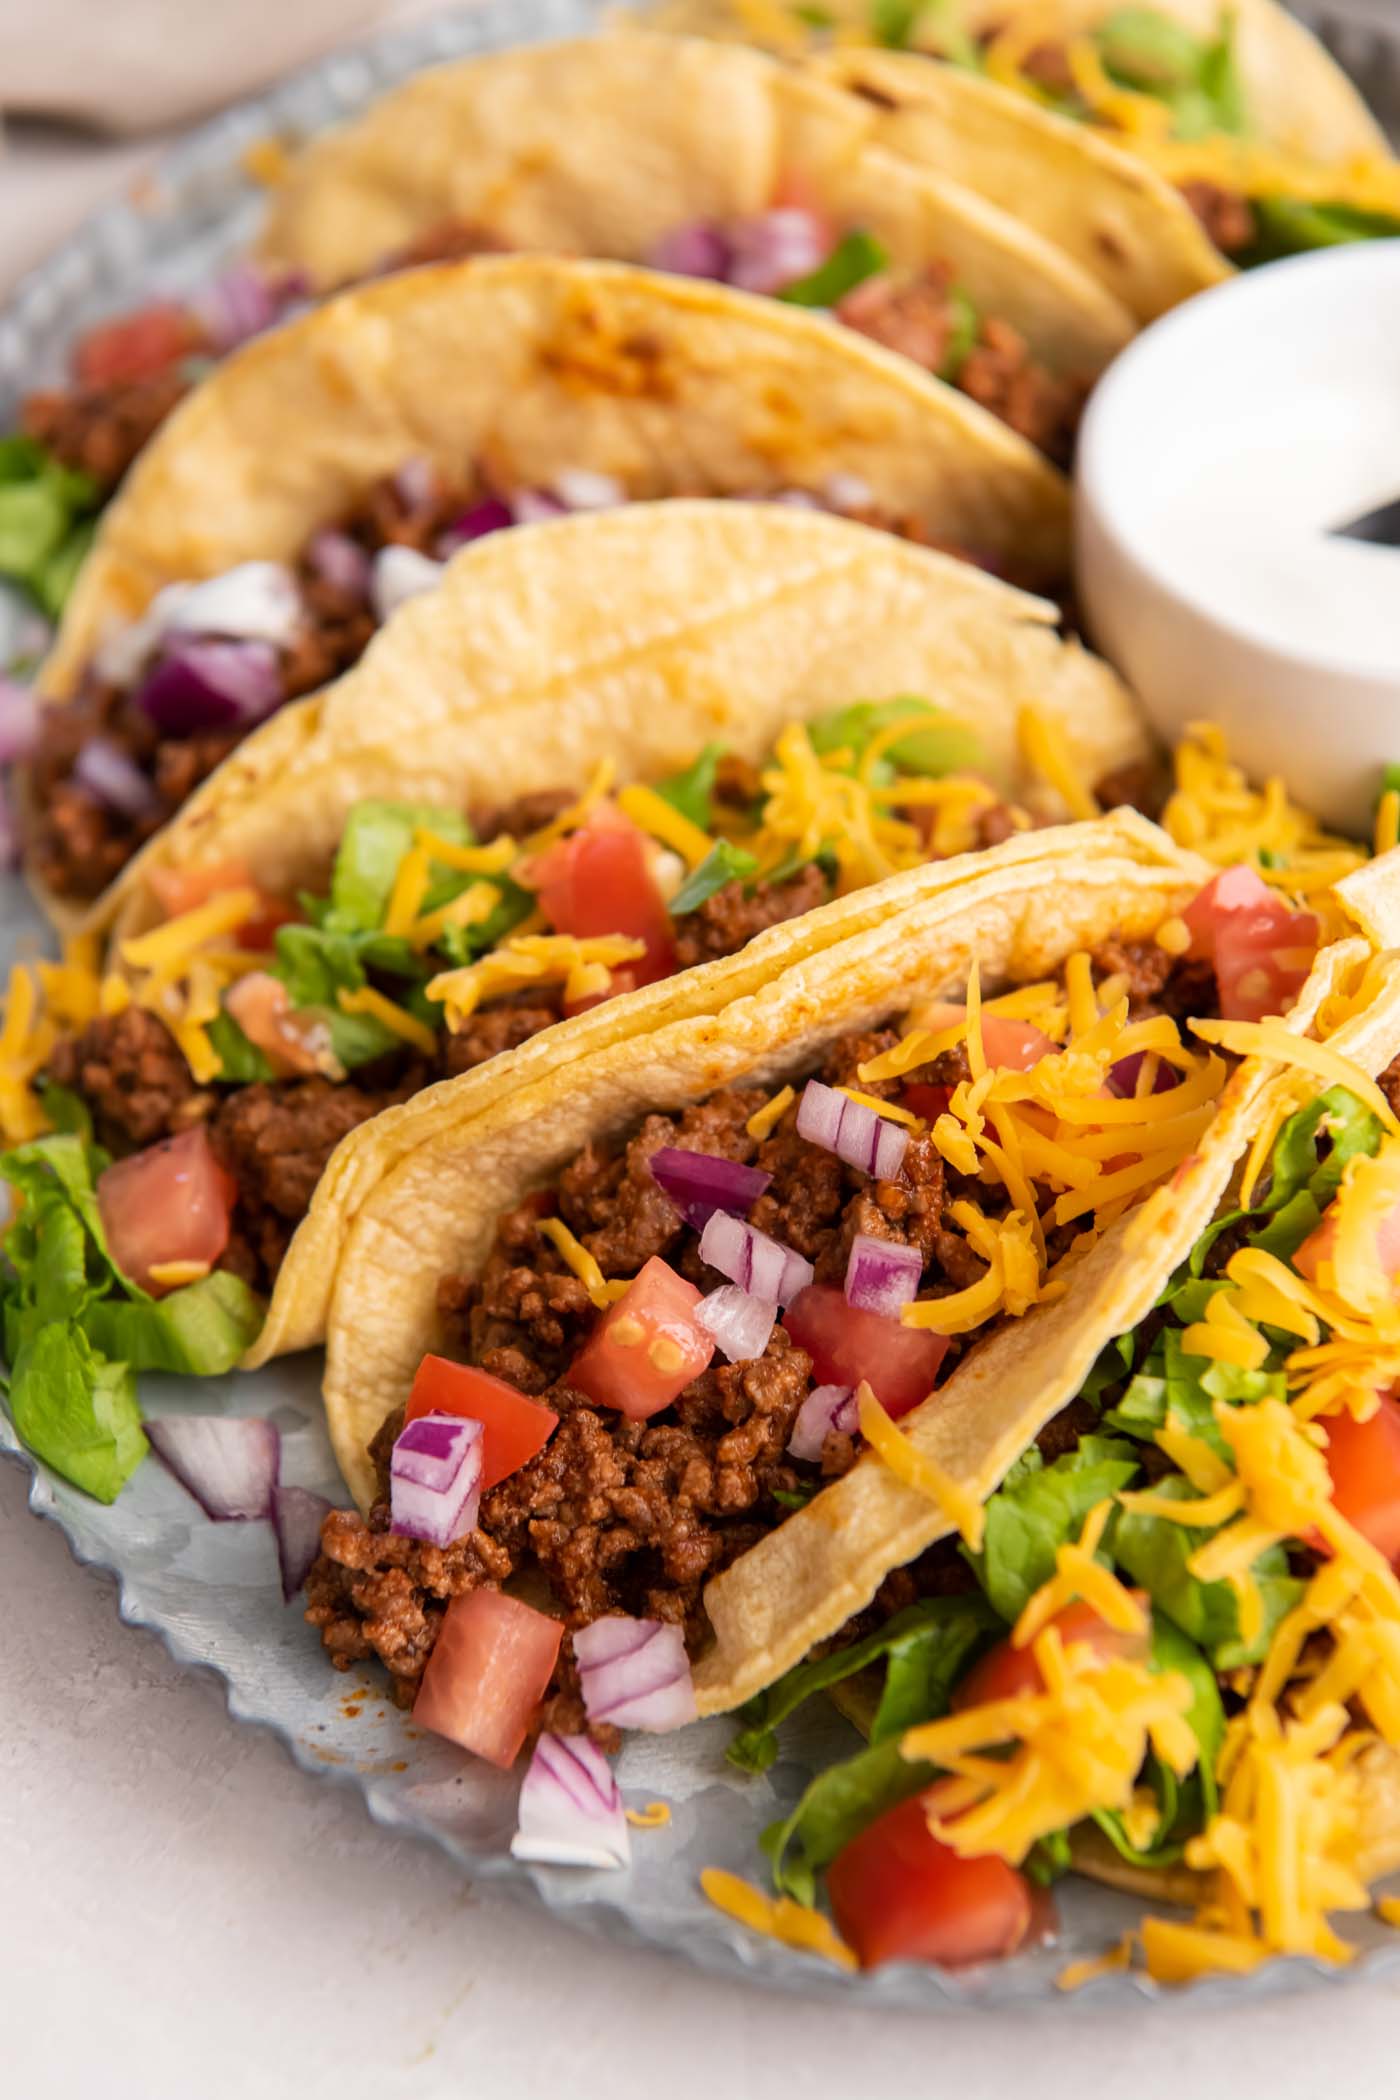 Ground beef tacos in corn tortillas with toppings.